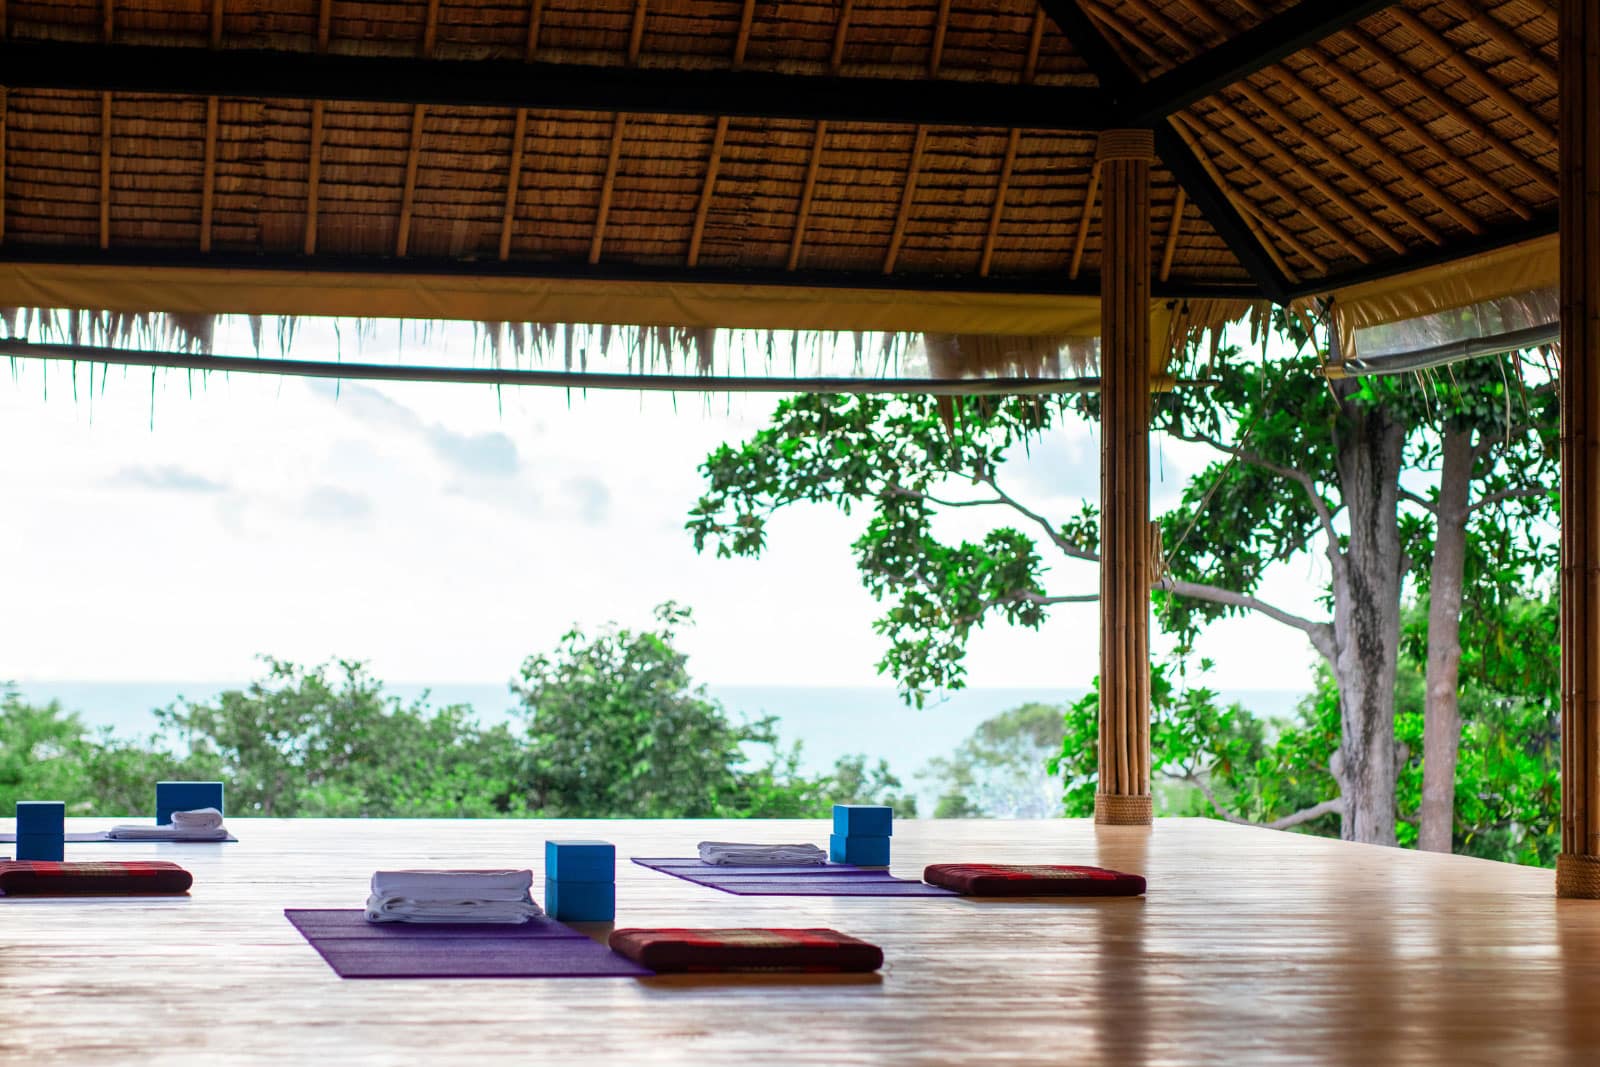 Pilates and Yoga space near the beach at the Thailand resort